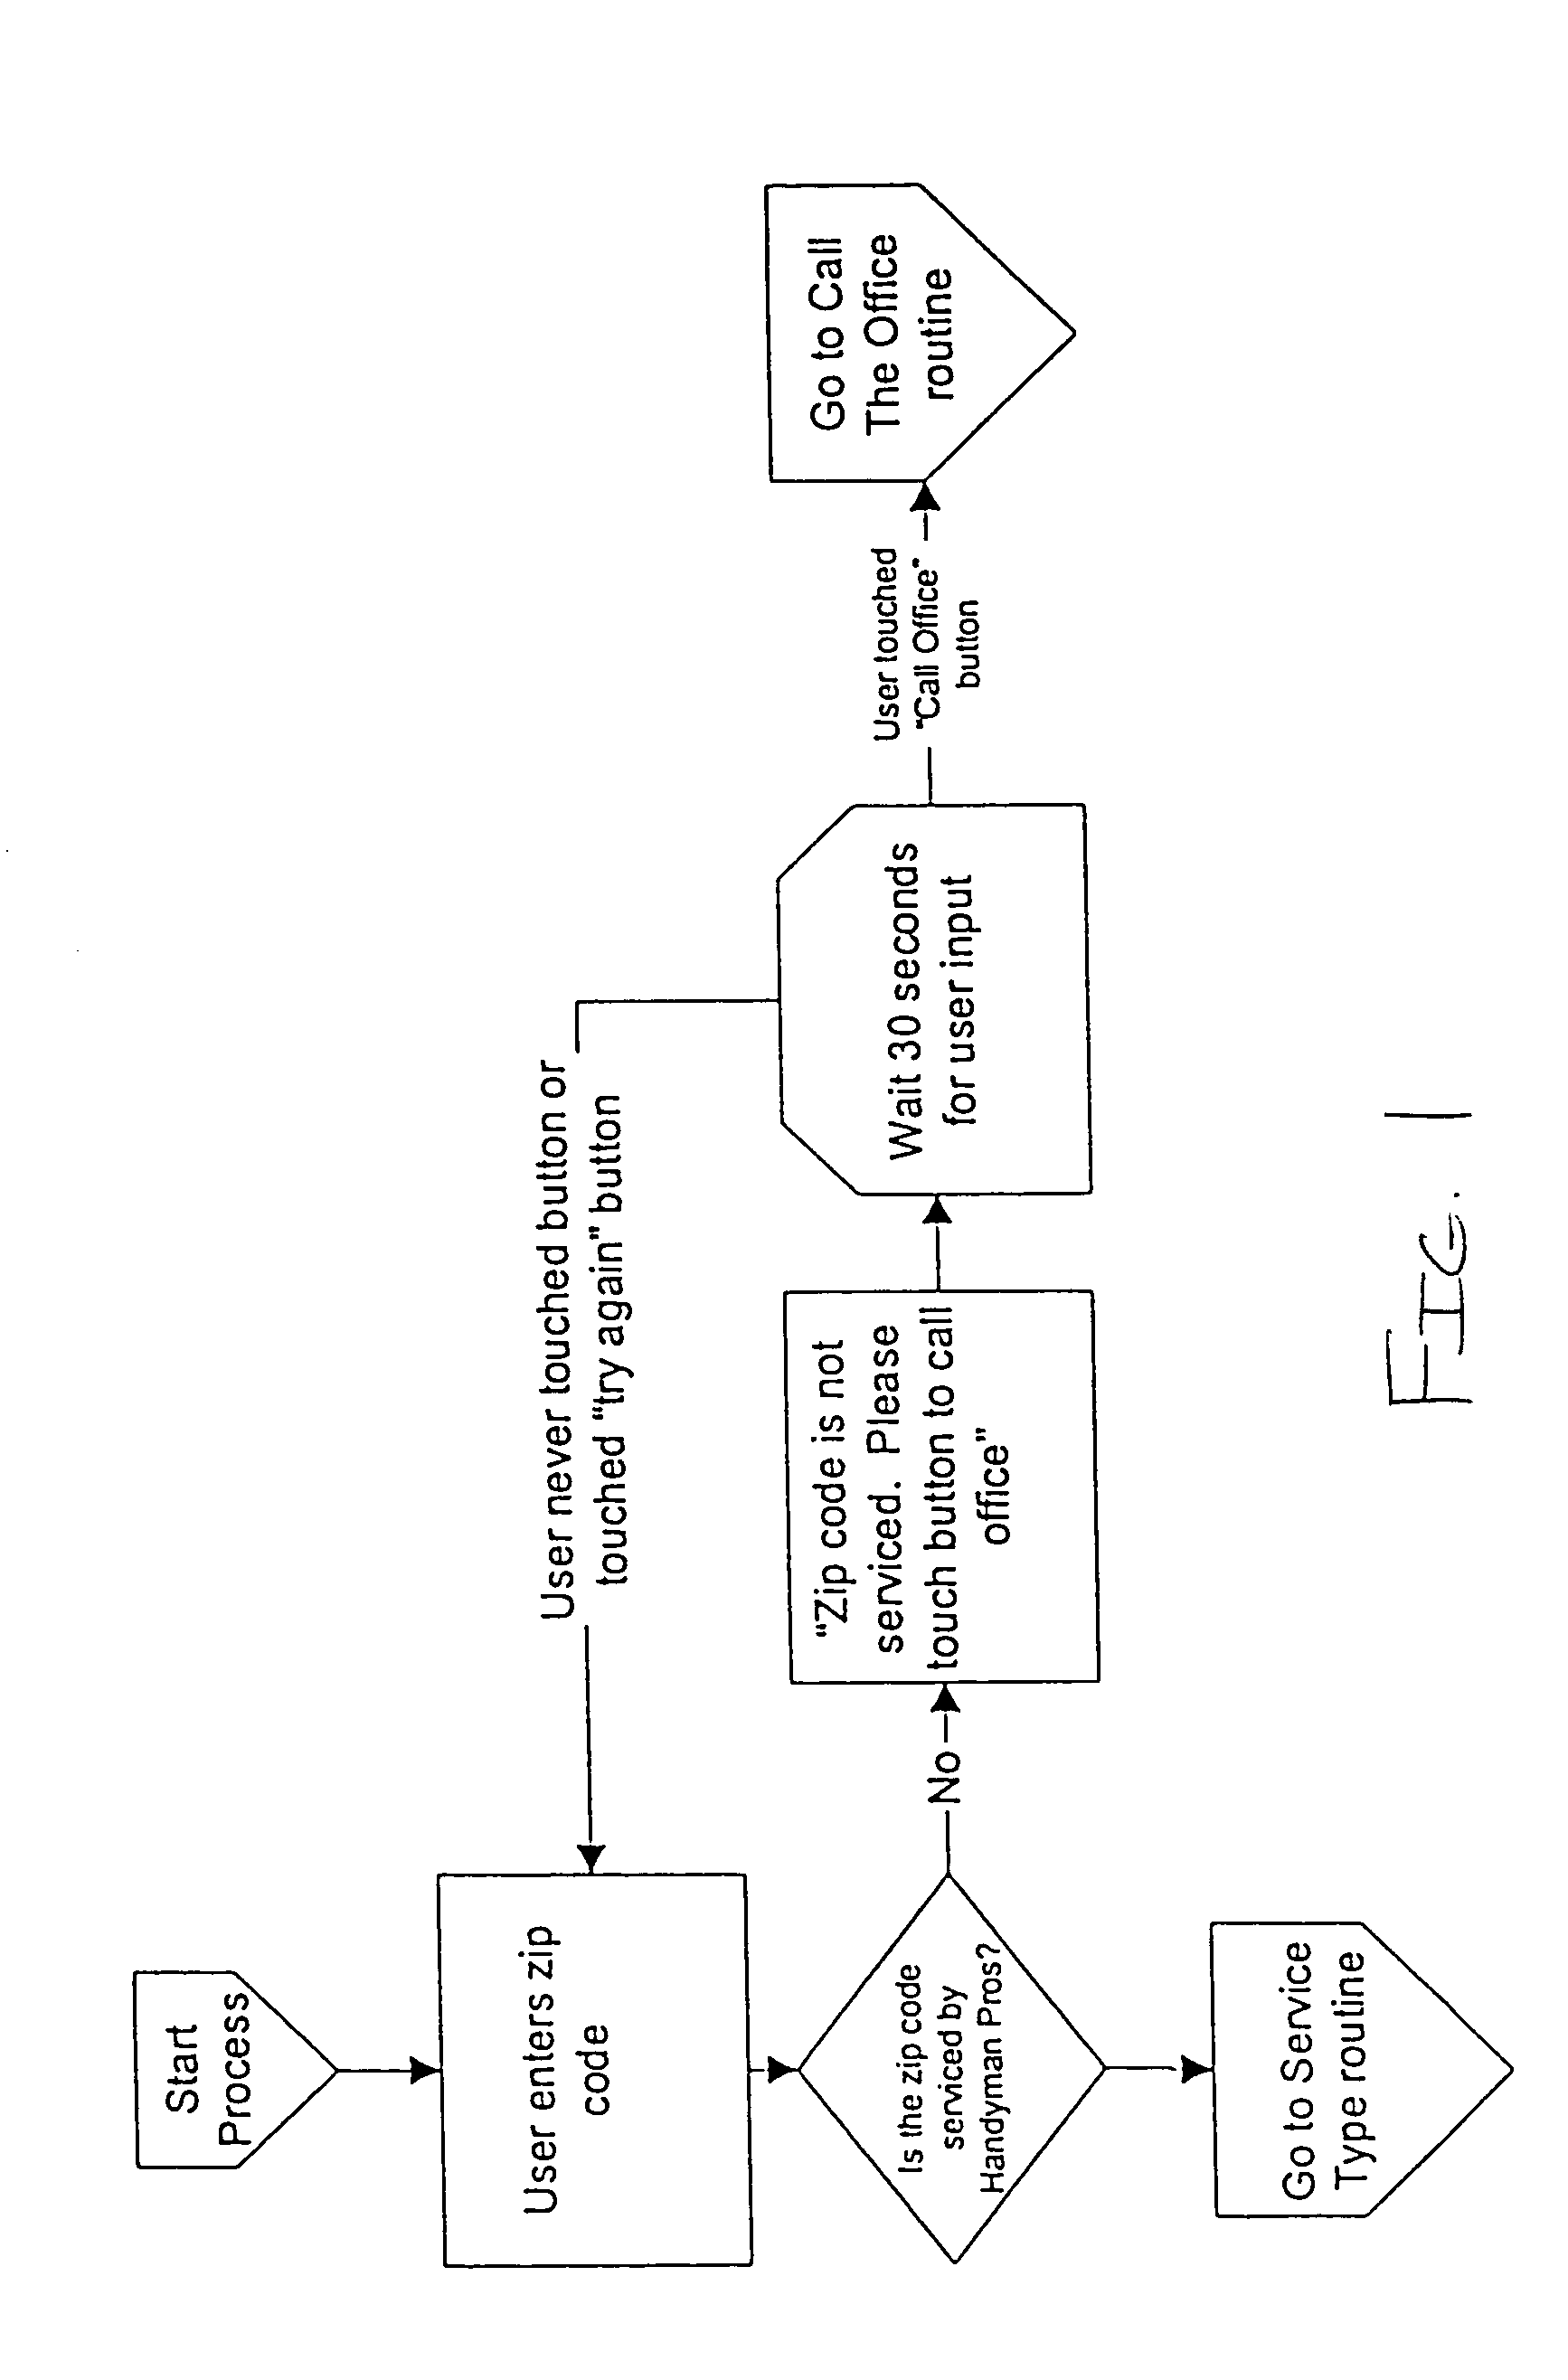 System and method for scheduling location-specific services